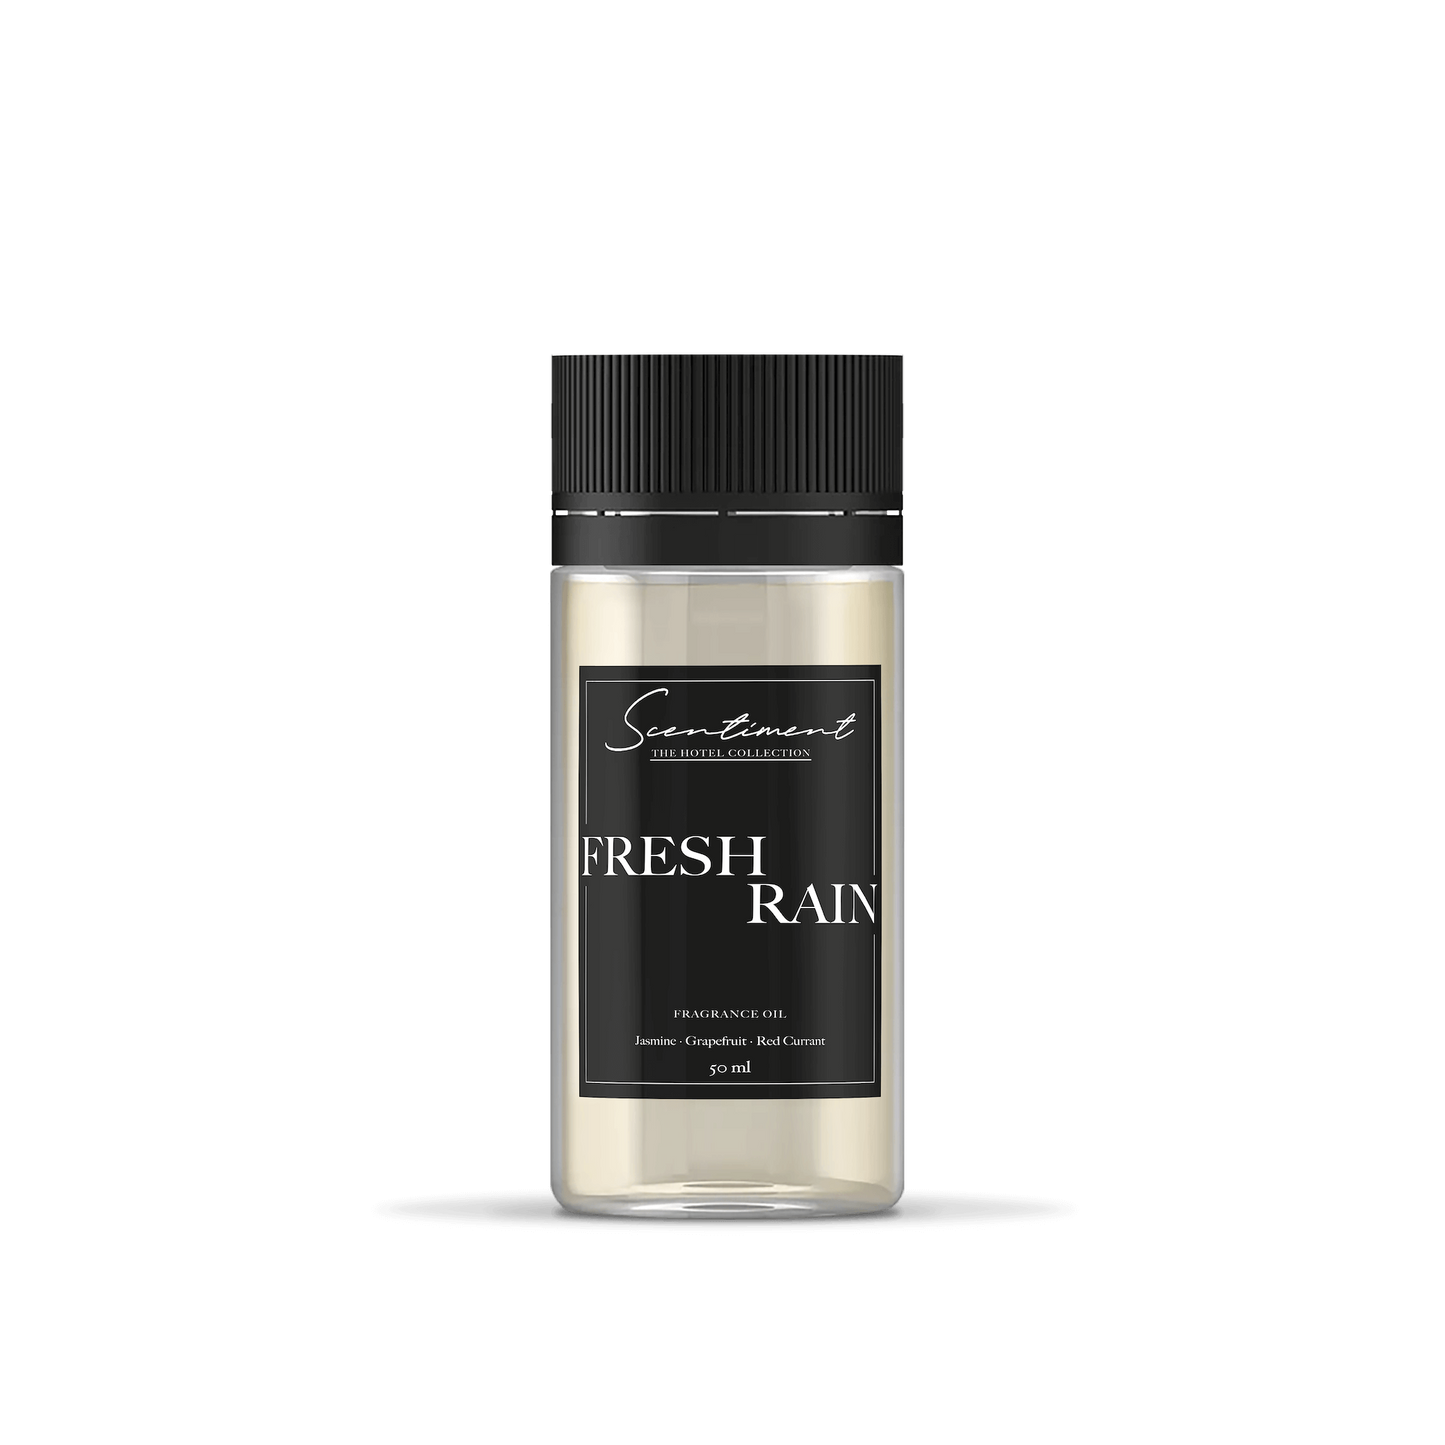 Fresh Rain Fragrance Oil inspired by Marriott® Hotels, with notes of Jasmine, Grapefruit, and Red Currant.